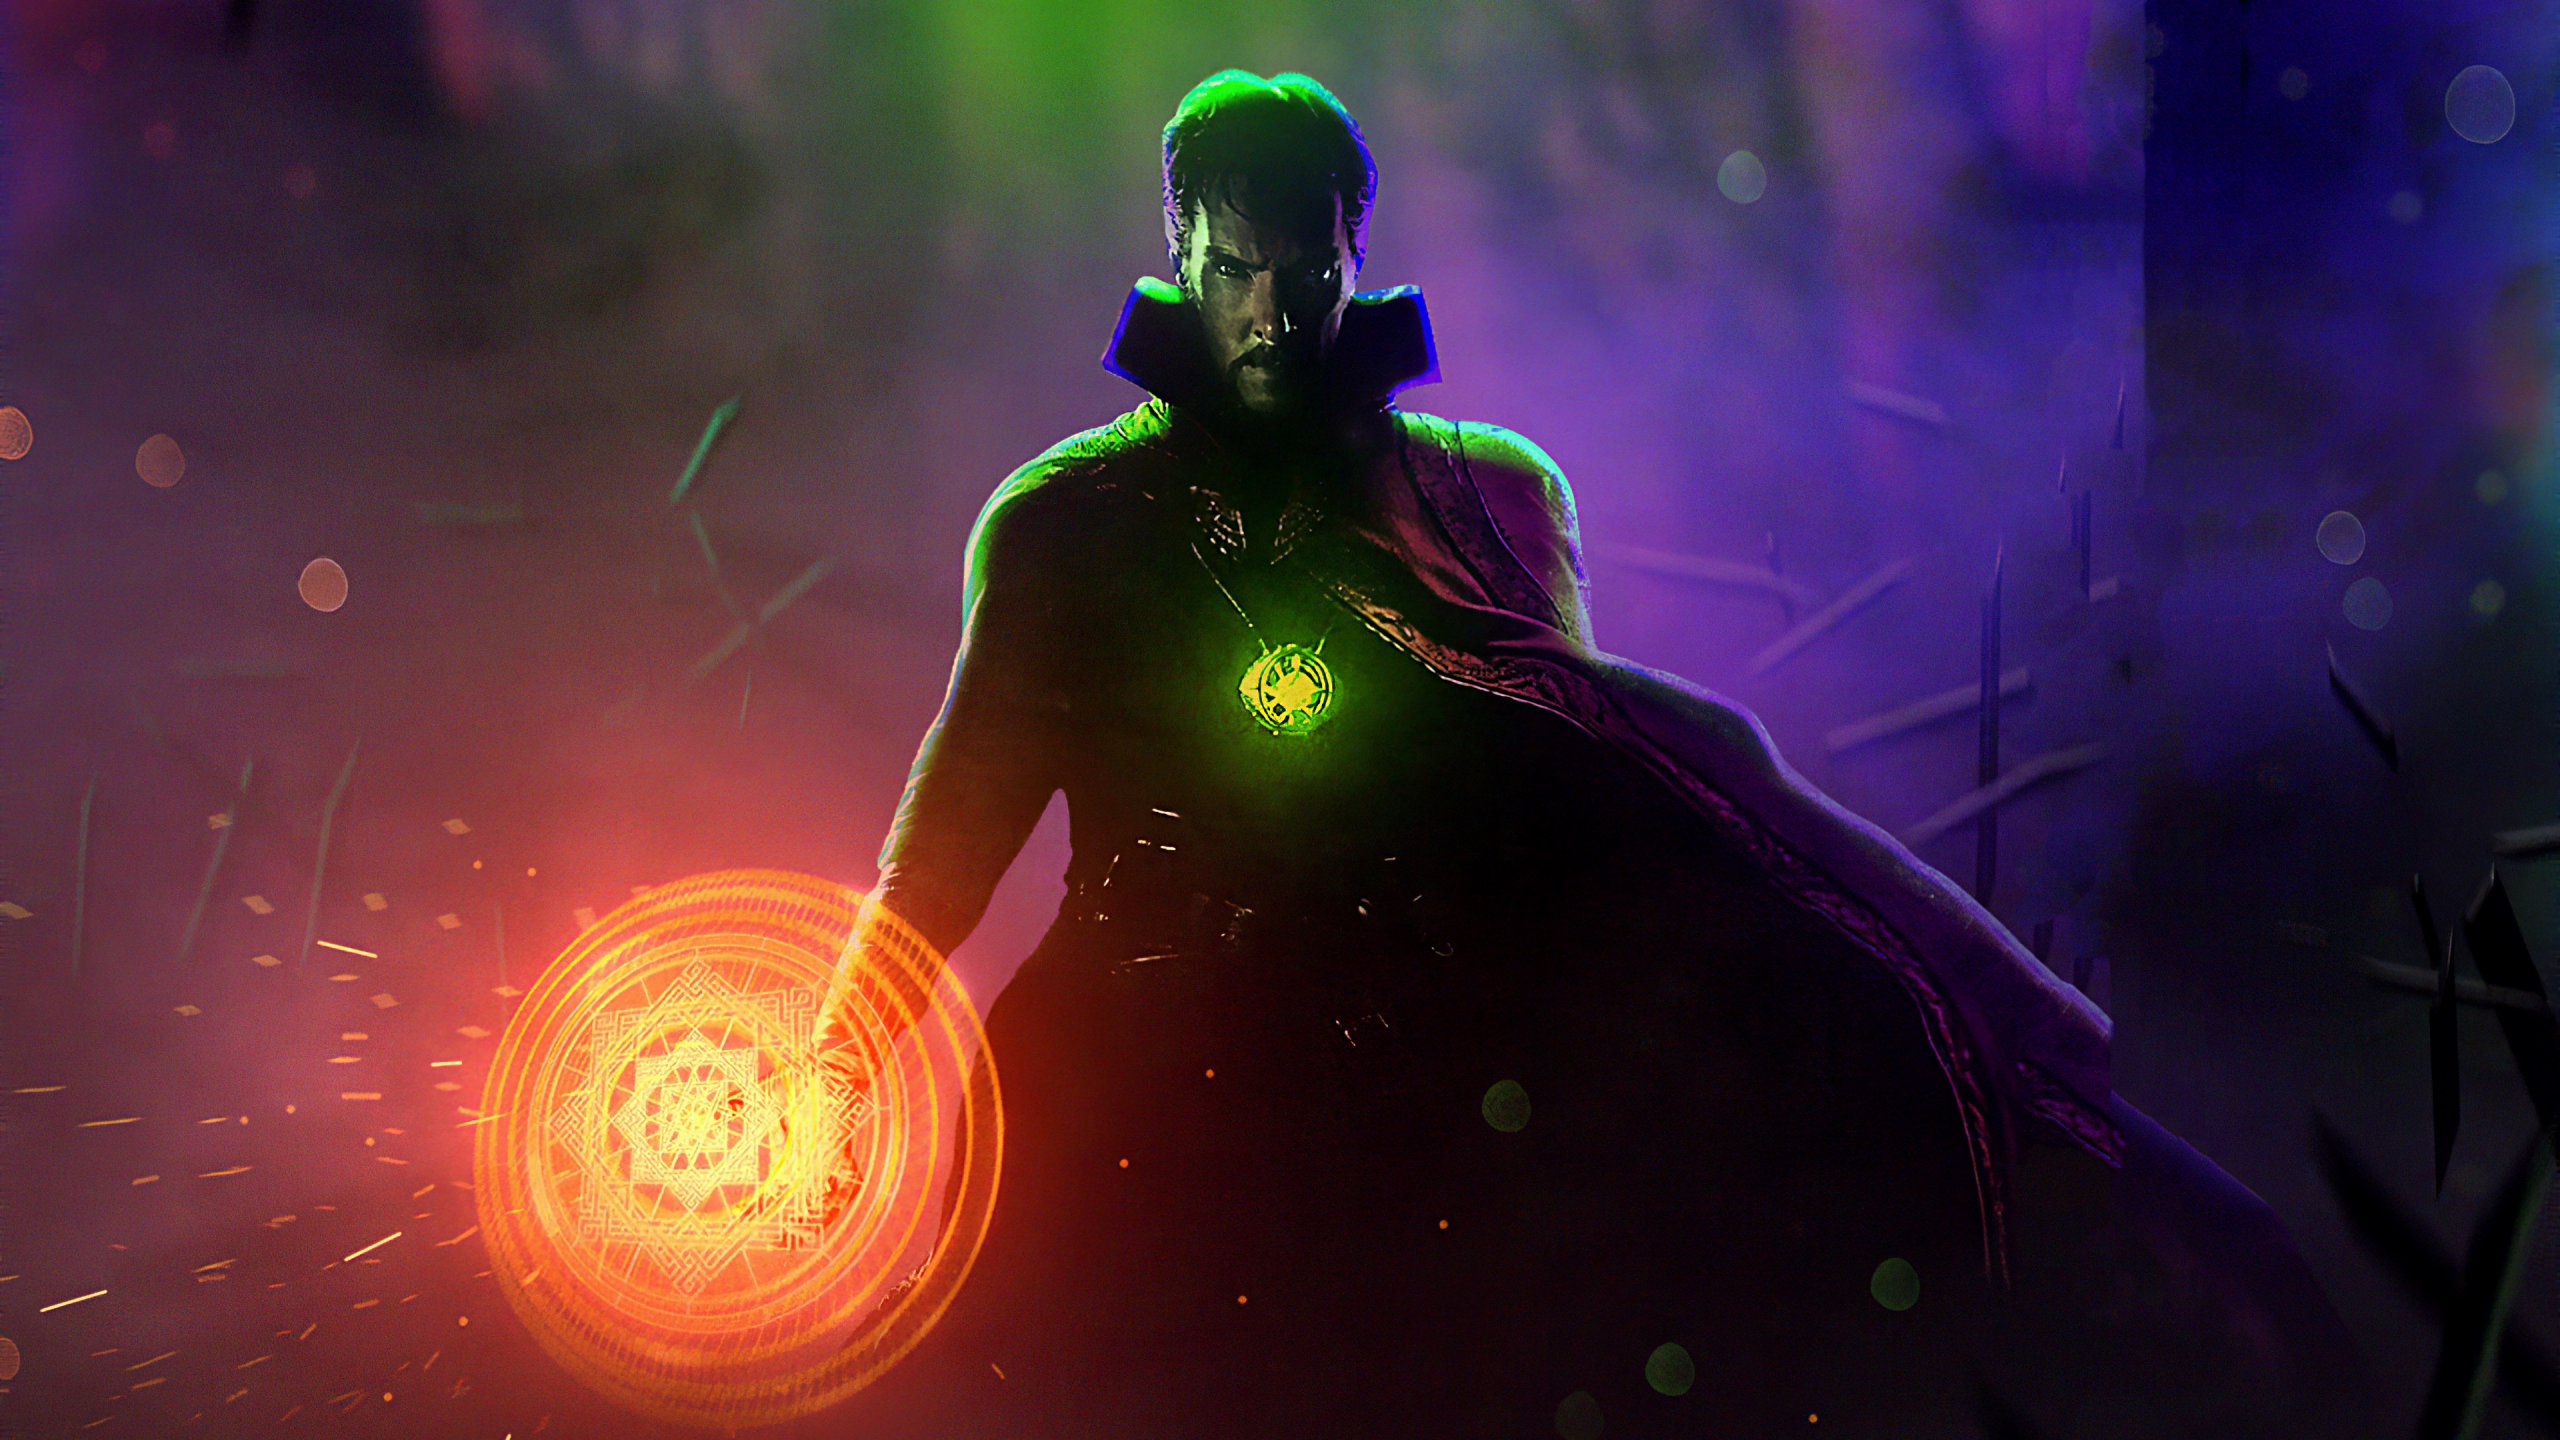 Doctor Strange What If Wallpapers - Wallpaper Cave